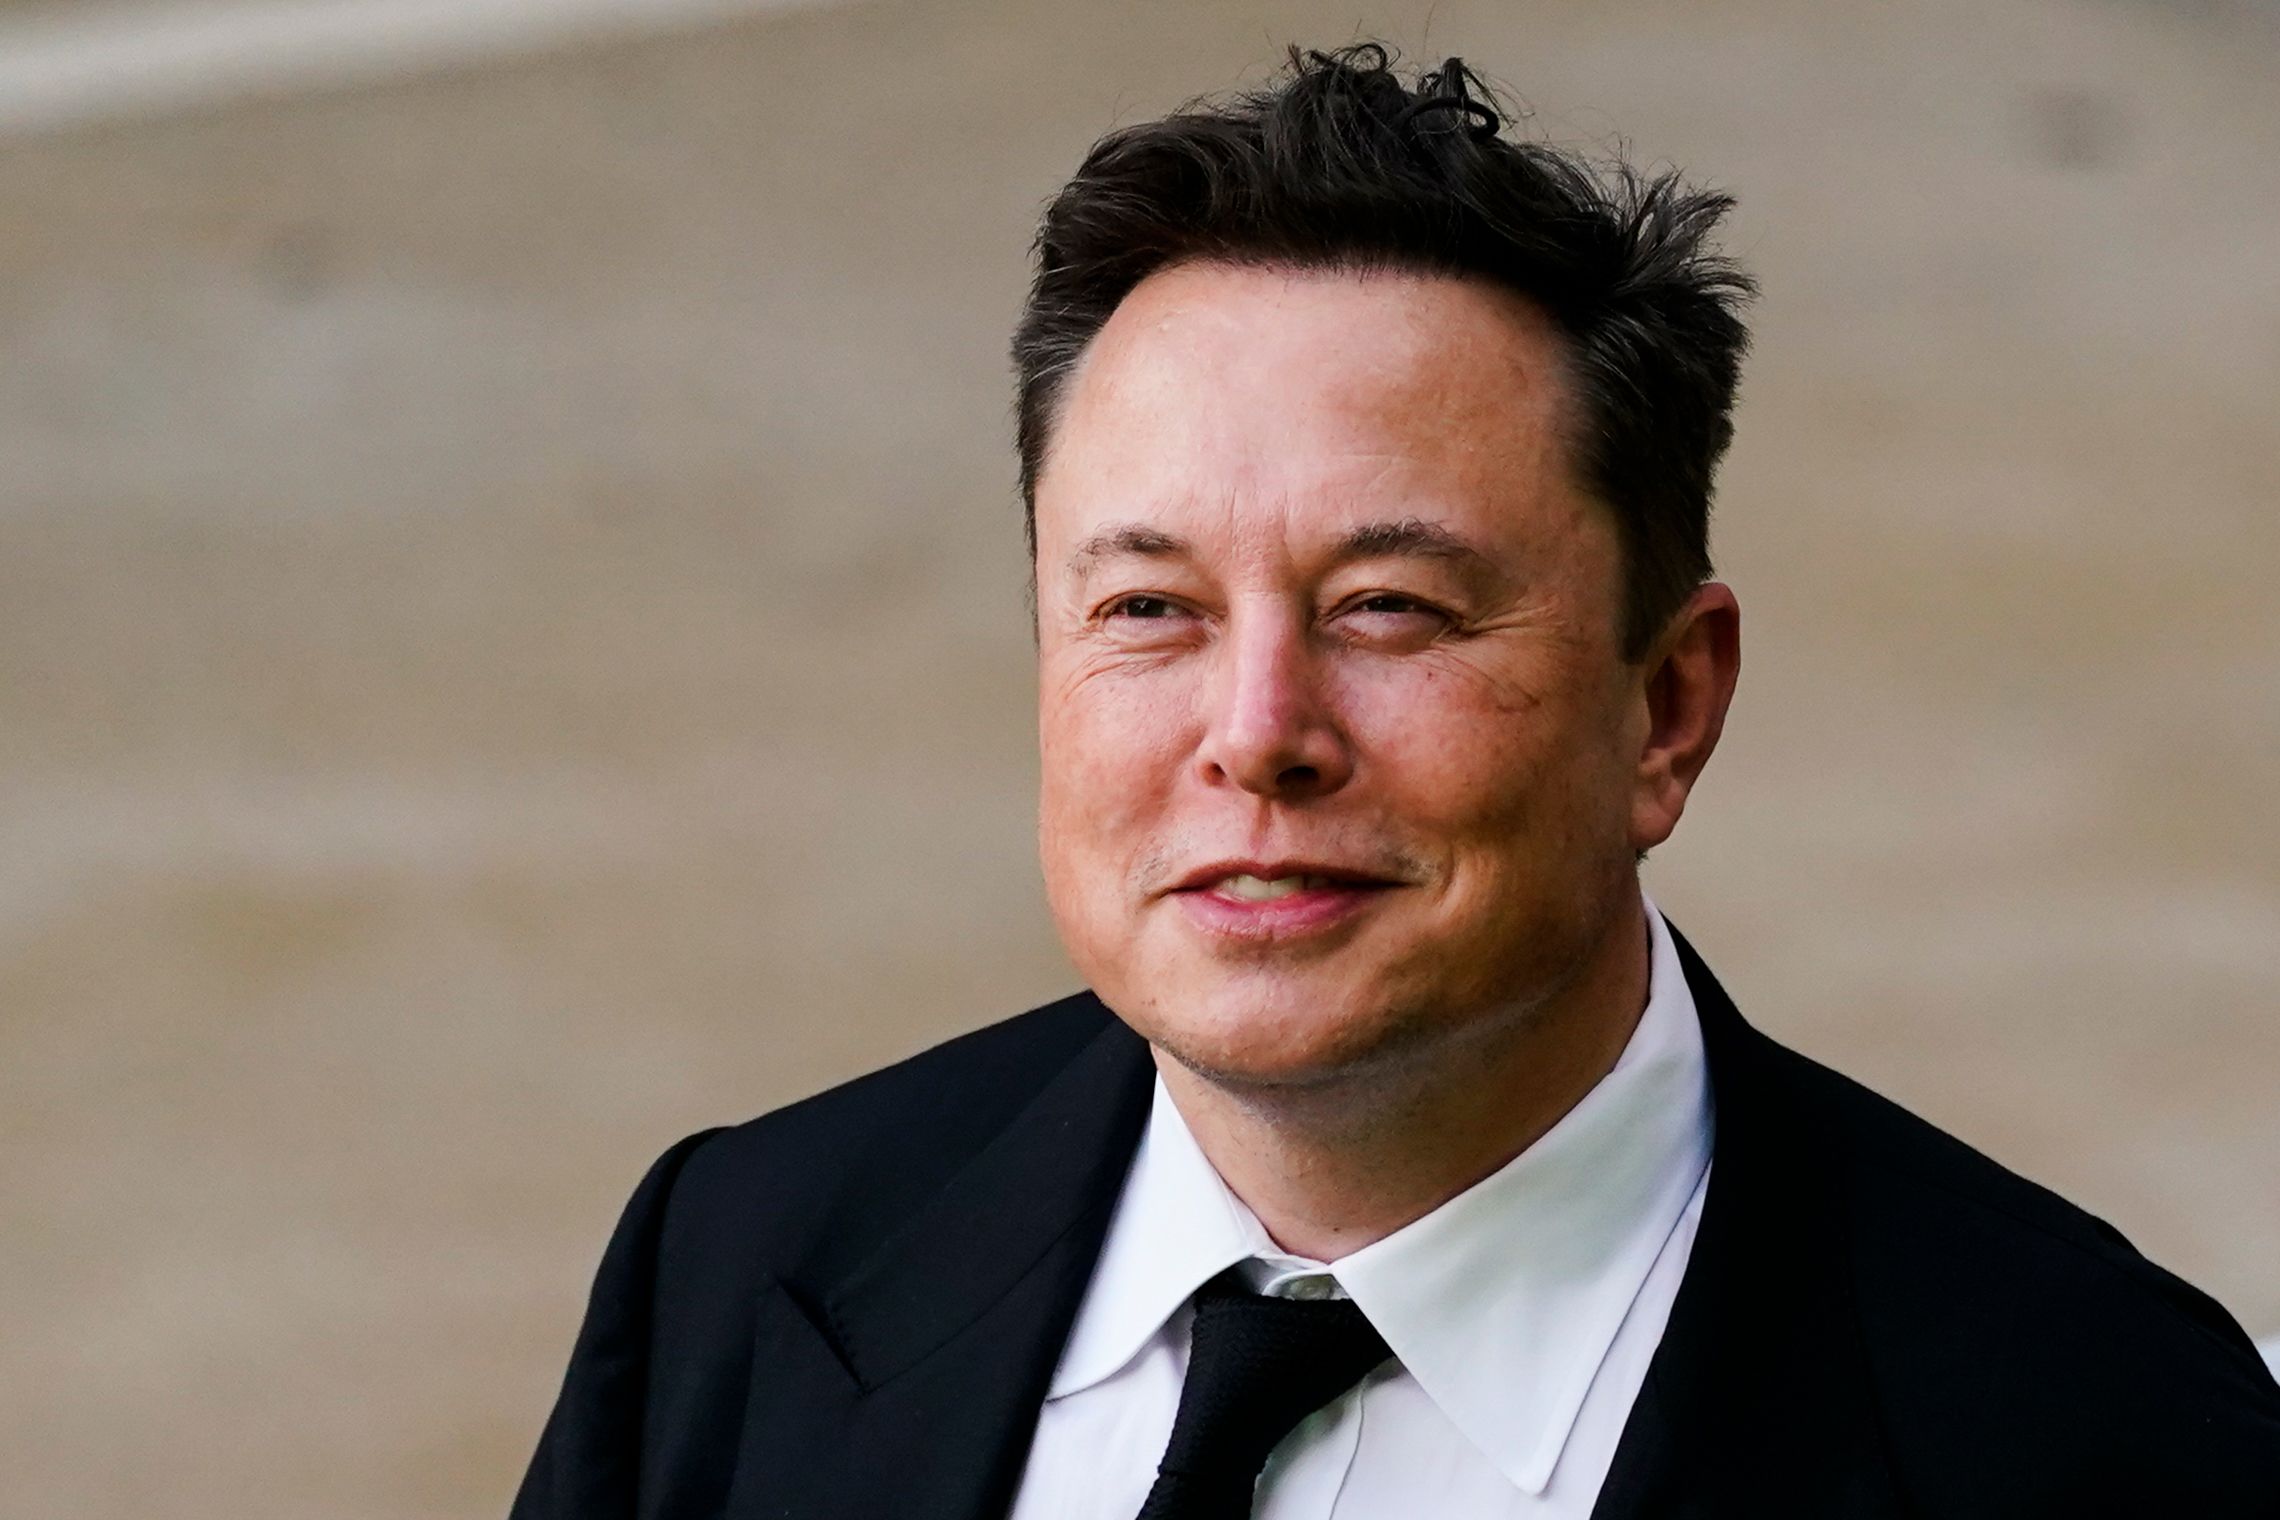 He played until 5:30 in the morning: Like a True Sigma, Elon Musk